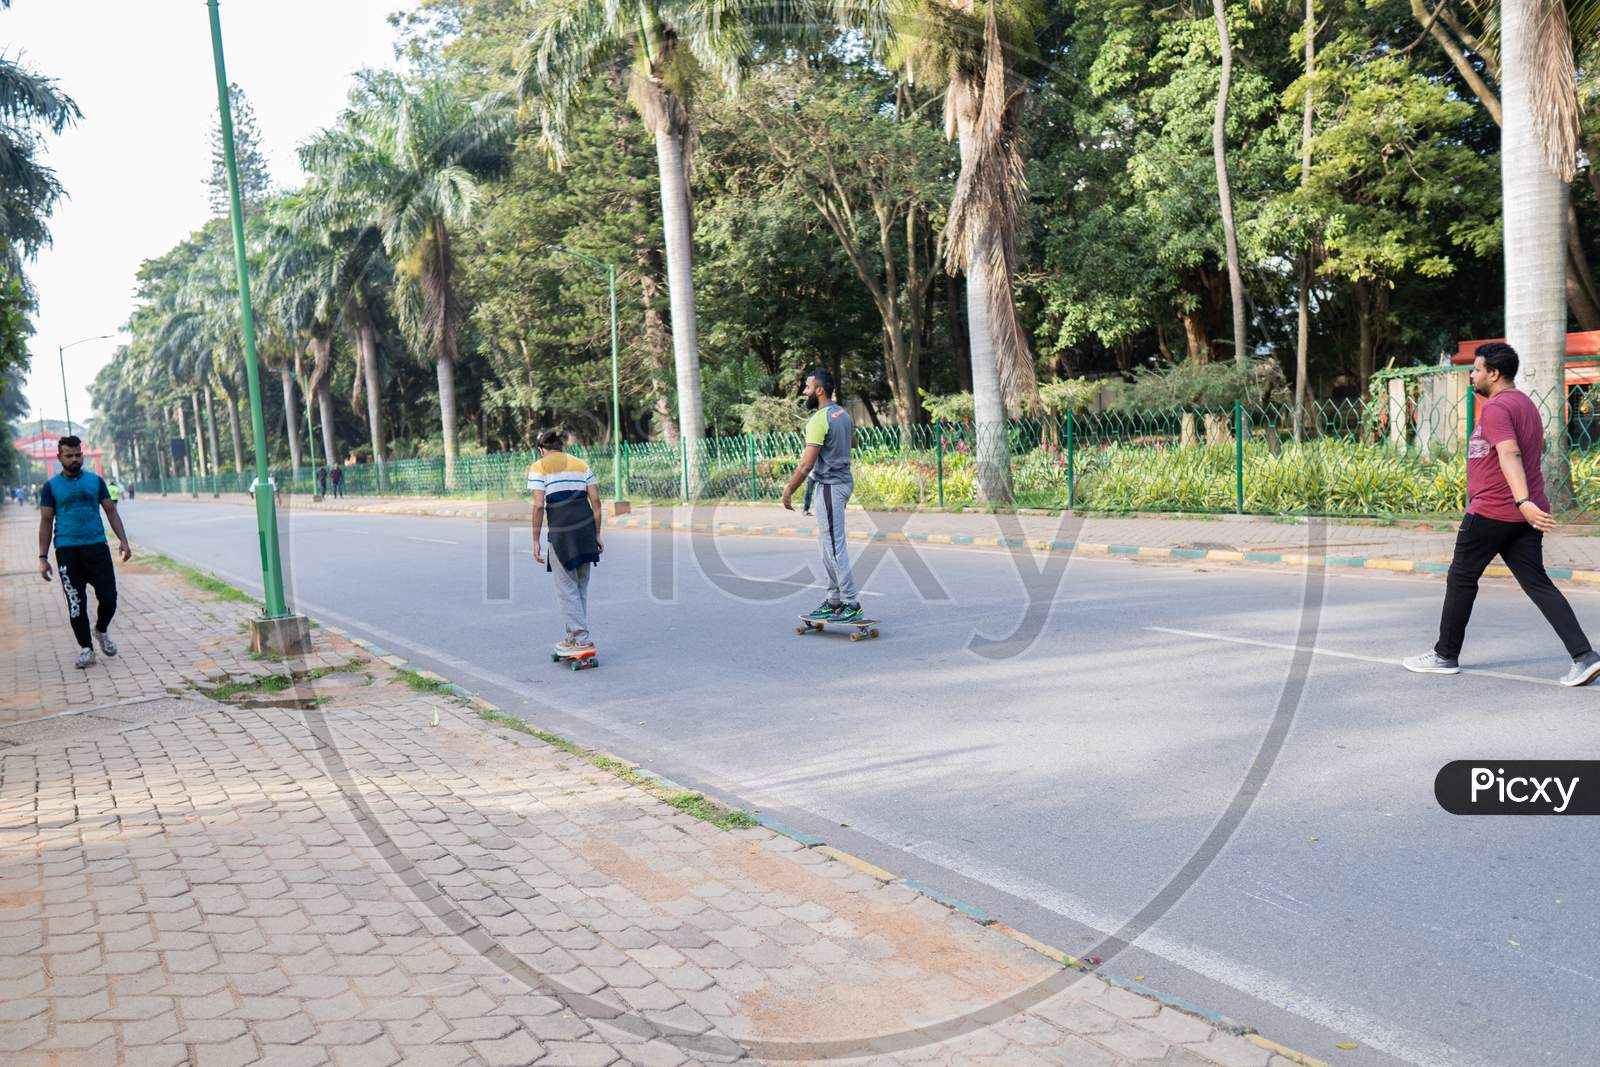 Cubbon Park,Bangalore,India-30Th November 2019 - Two Young Citizens Going On A Skate Board In Cubbon Park